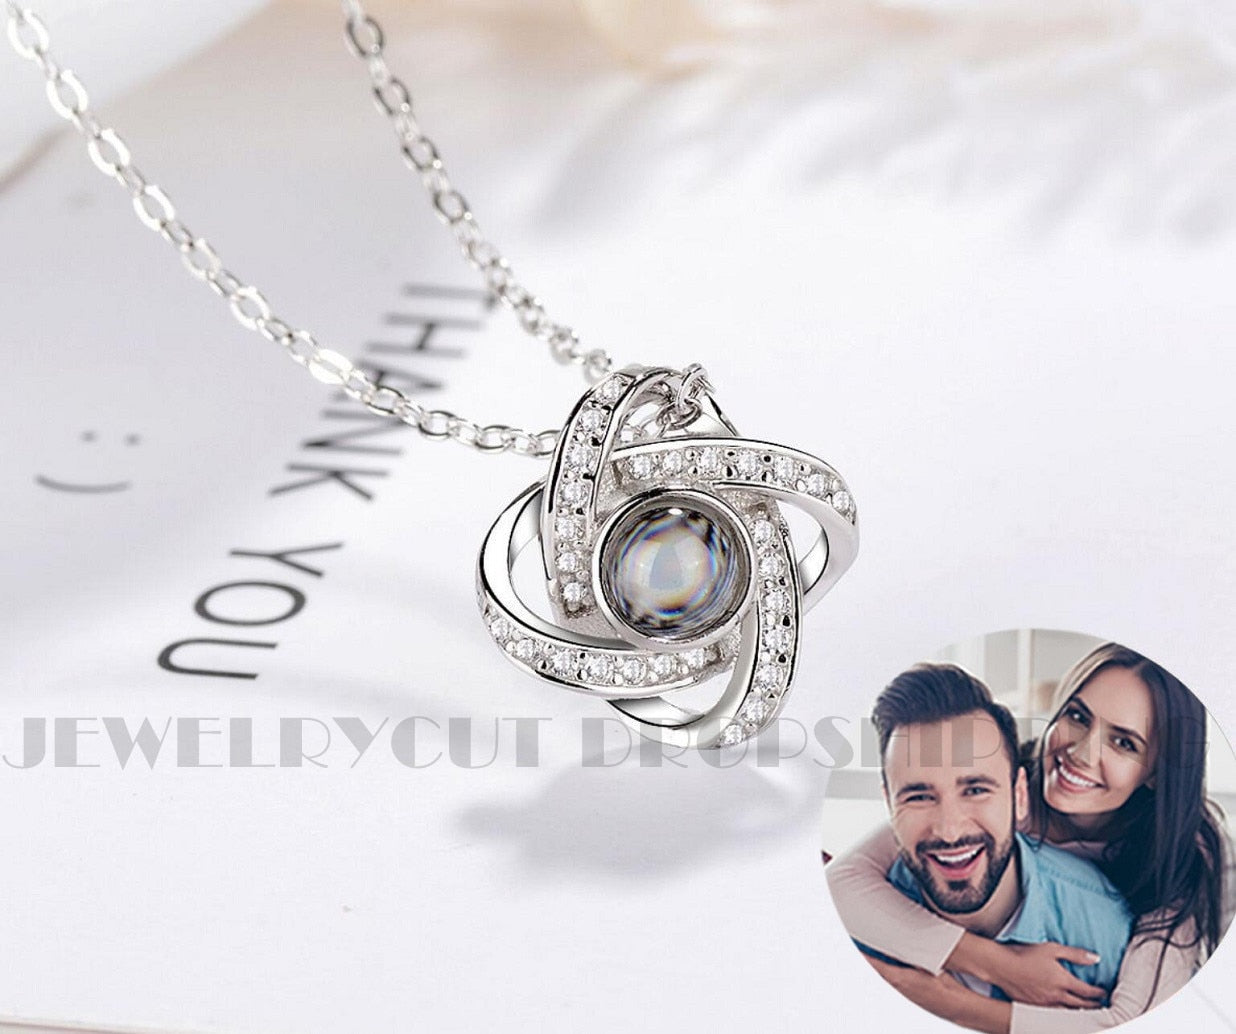 New Projection Pendant Custom Photo Anniversary Birthday Gift for Family, Friends and Lovers